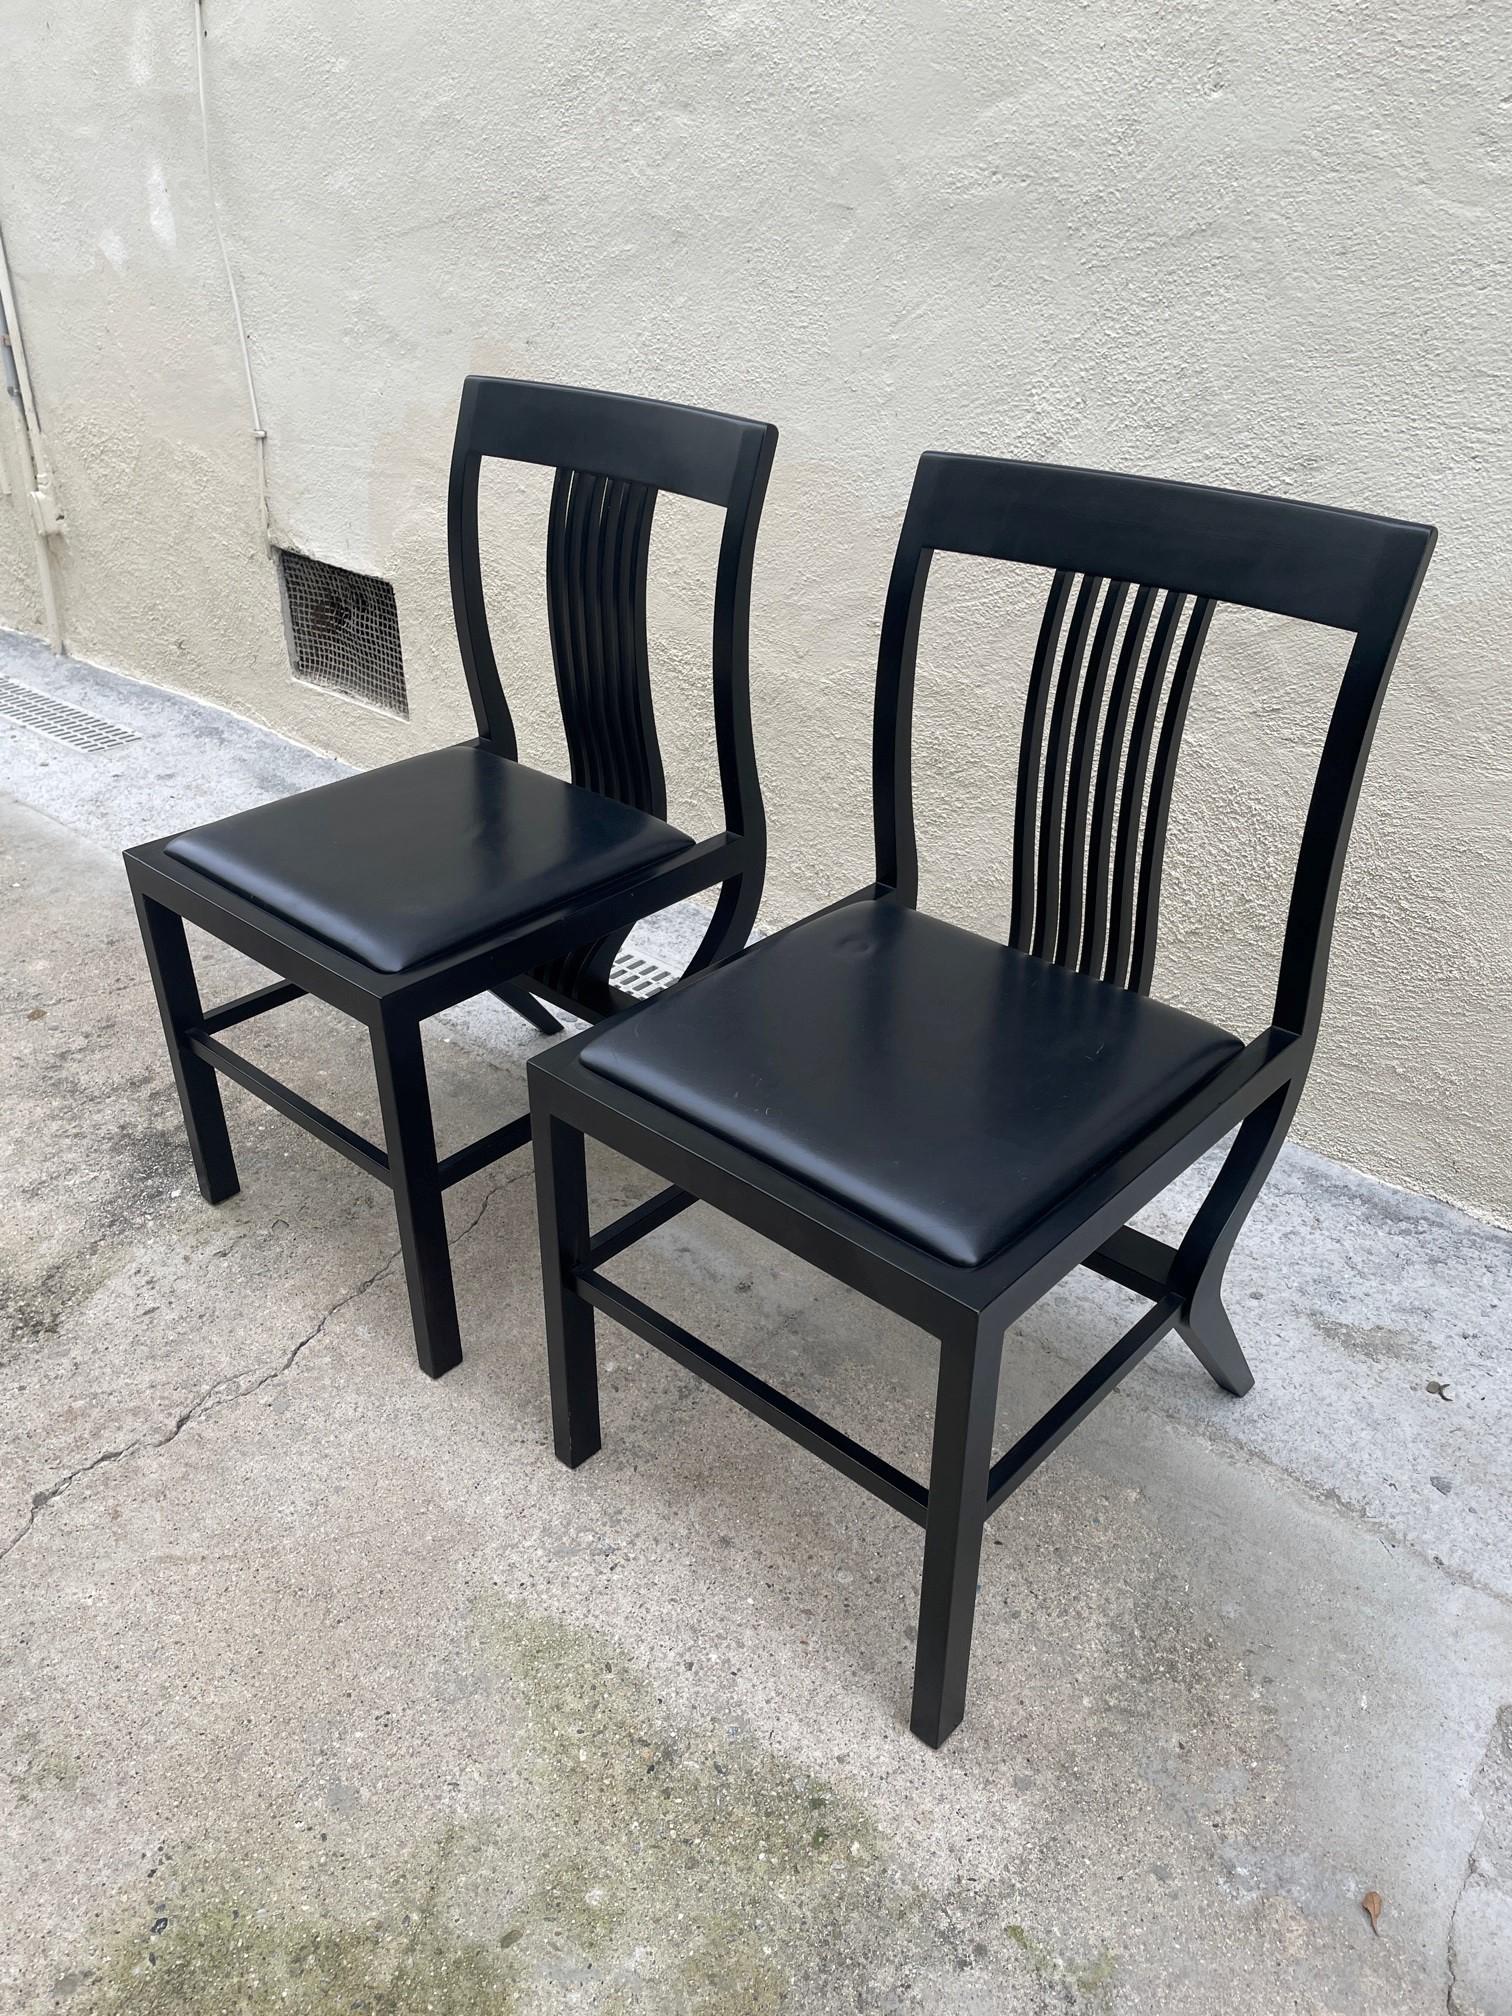 Beautiful pair of vintage 'Monroe' chairs designed by Arata Isozaki for Tendo, Japan c. 1980s. This pair/example was produced into 1985, in great condition with no significant damage/wear to frame.
Frame is in ebonized Cherrywood; sculptural in its